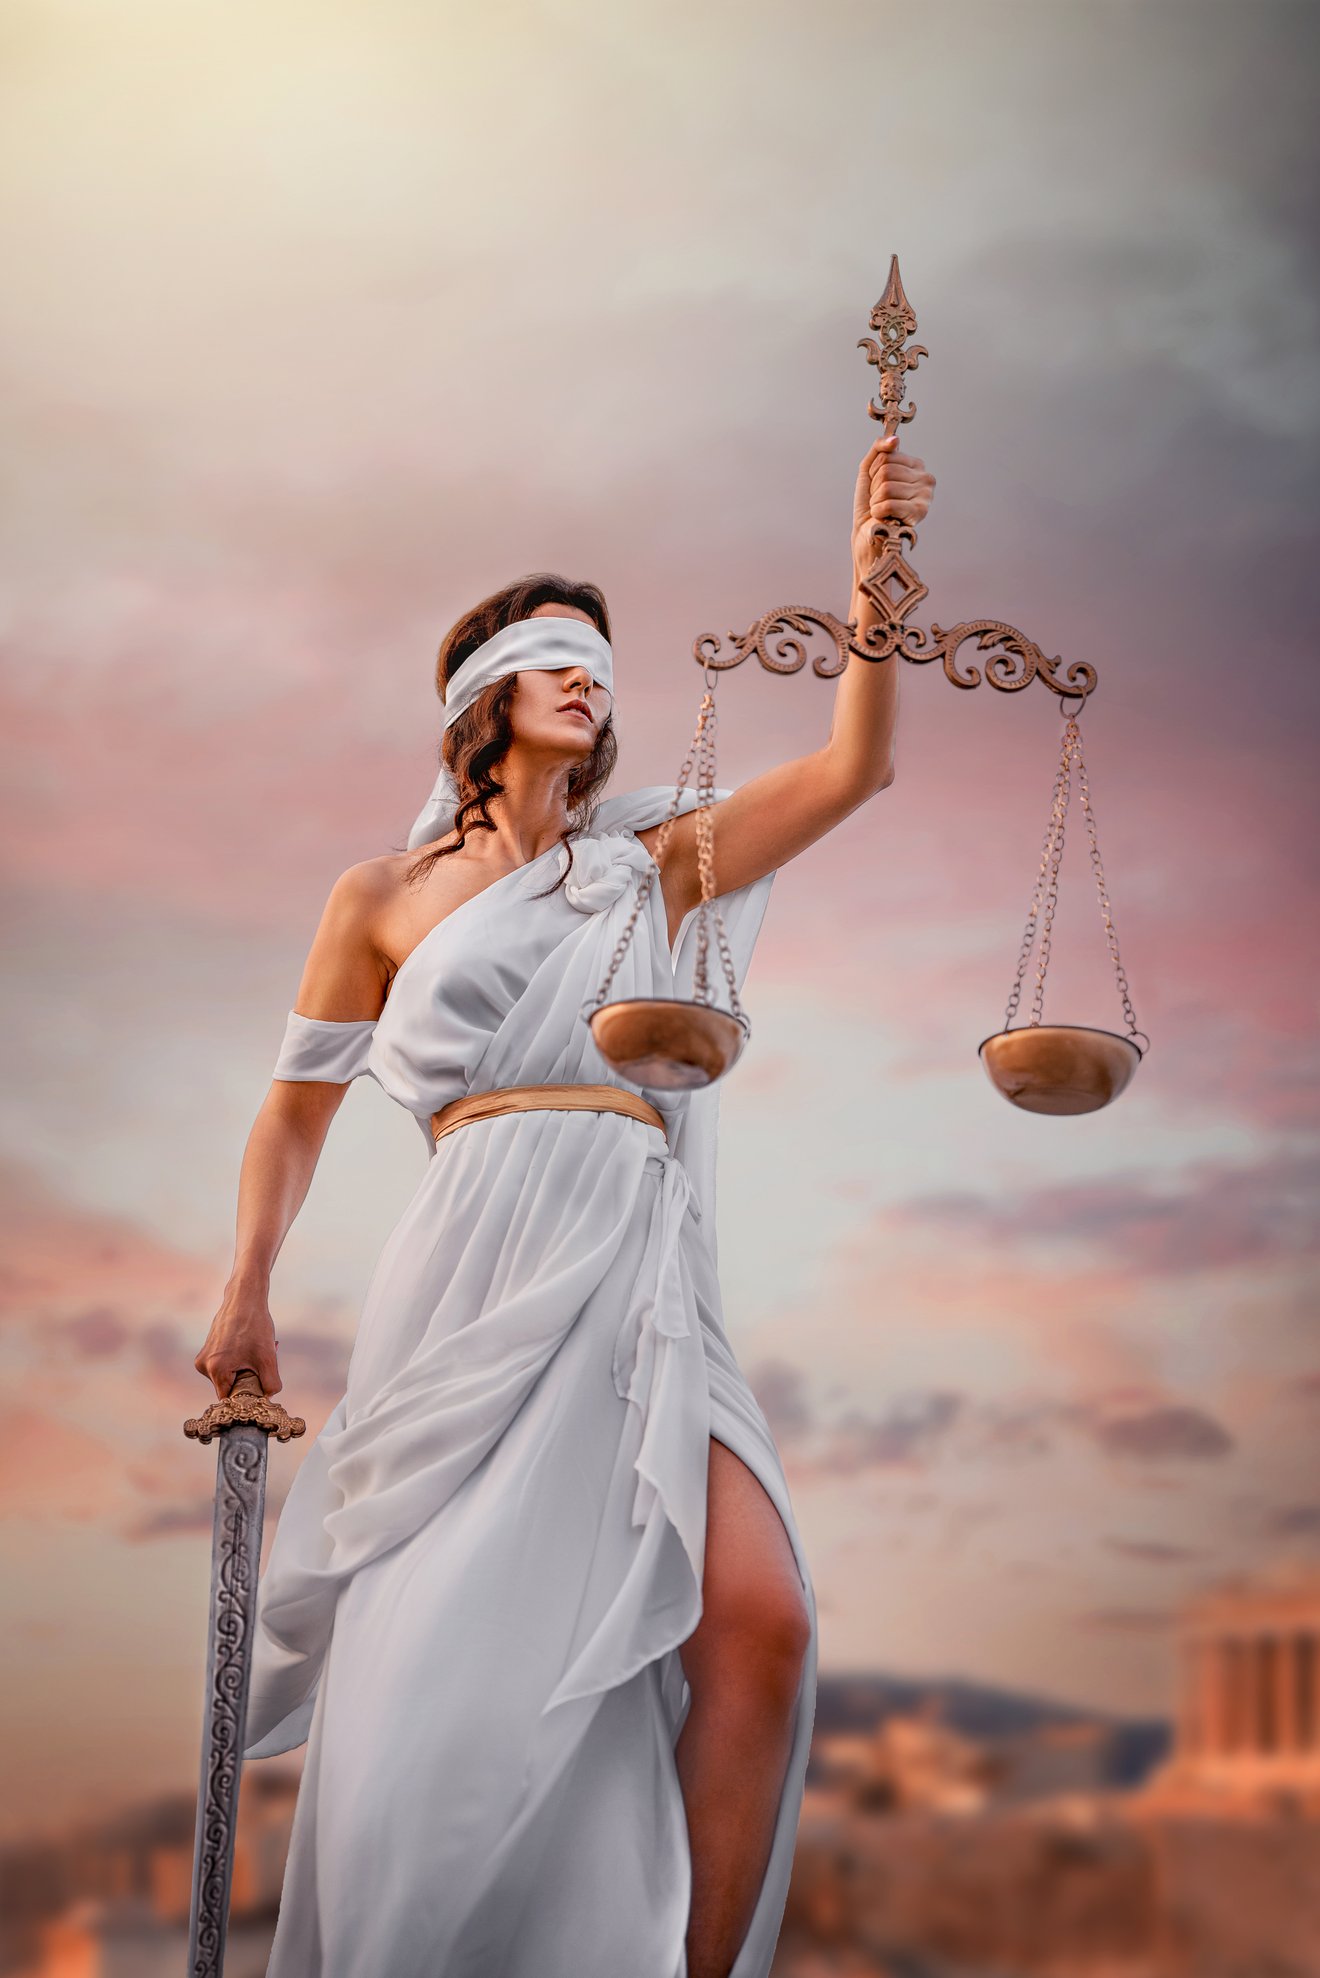 Lady Justice #2-Seed Nft